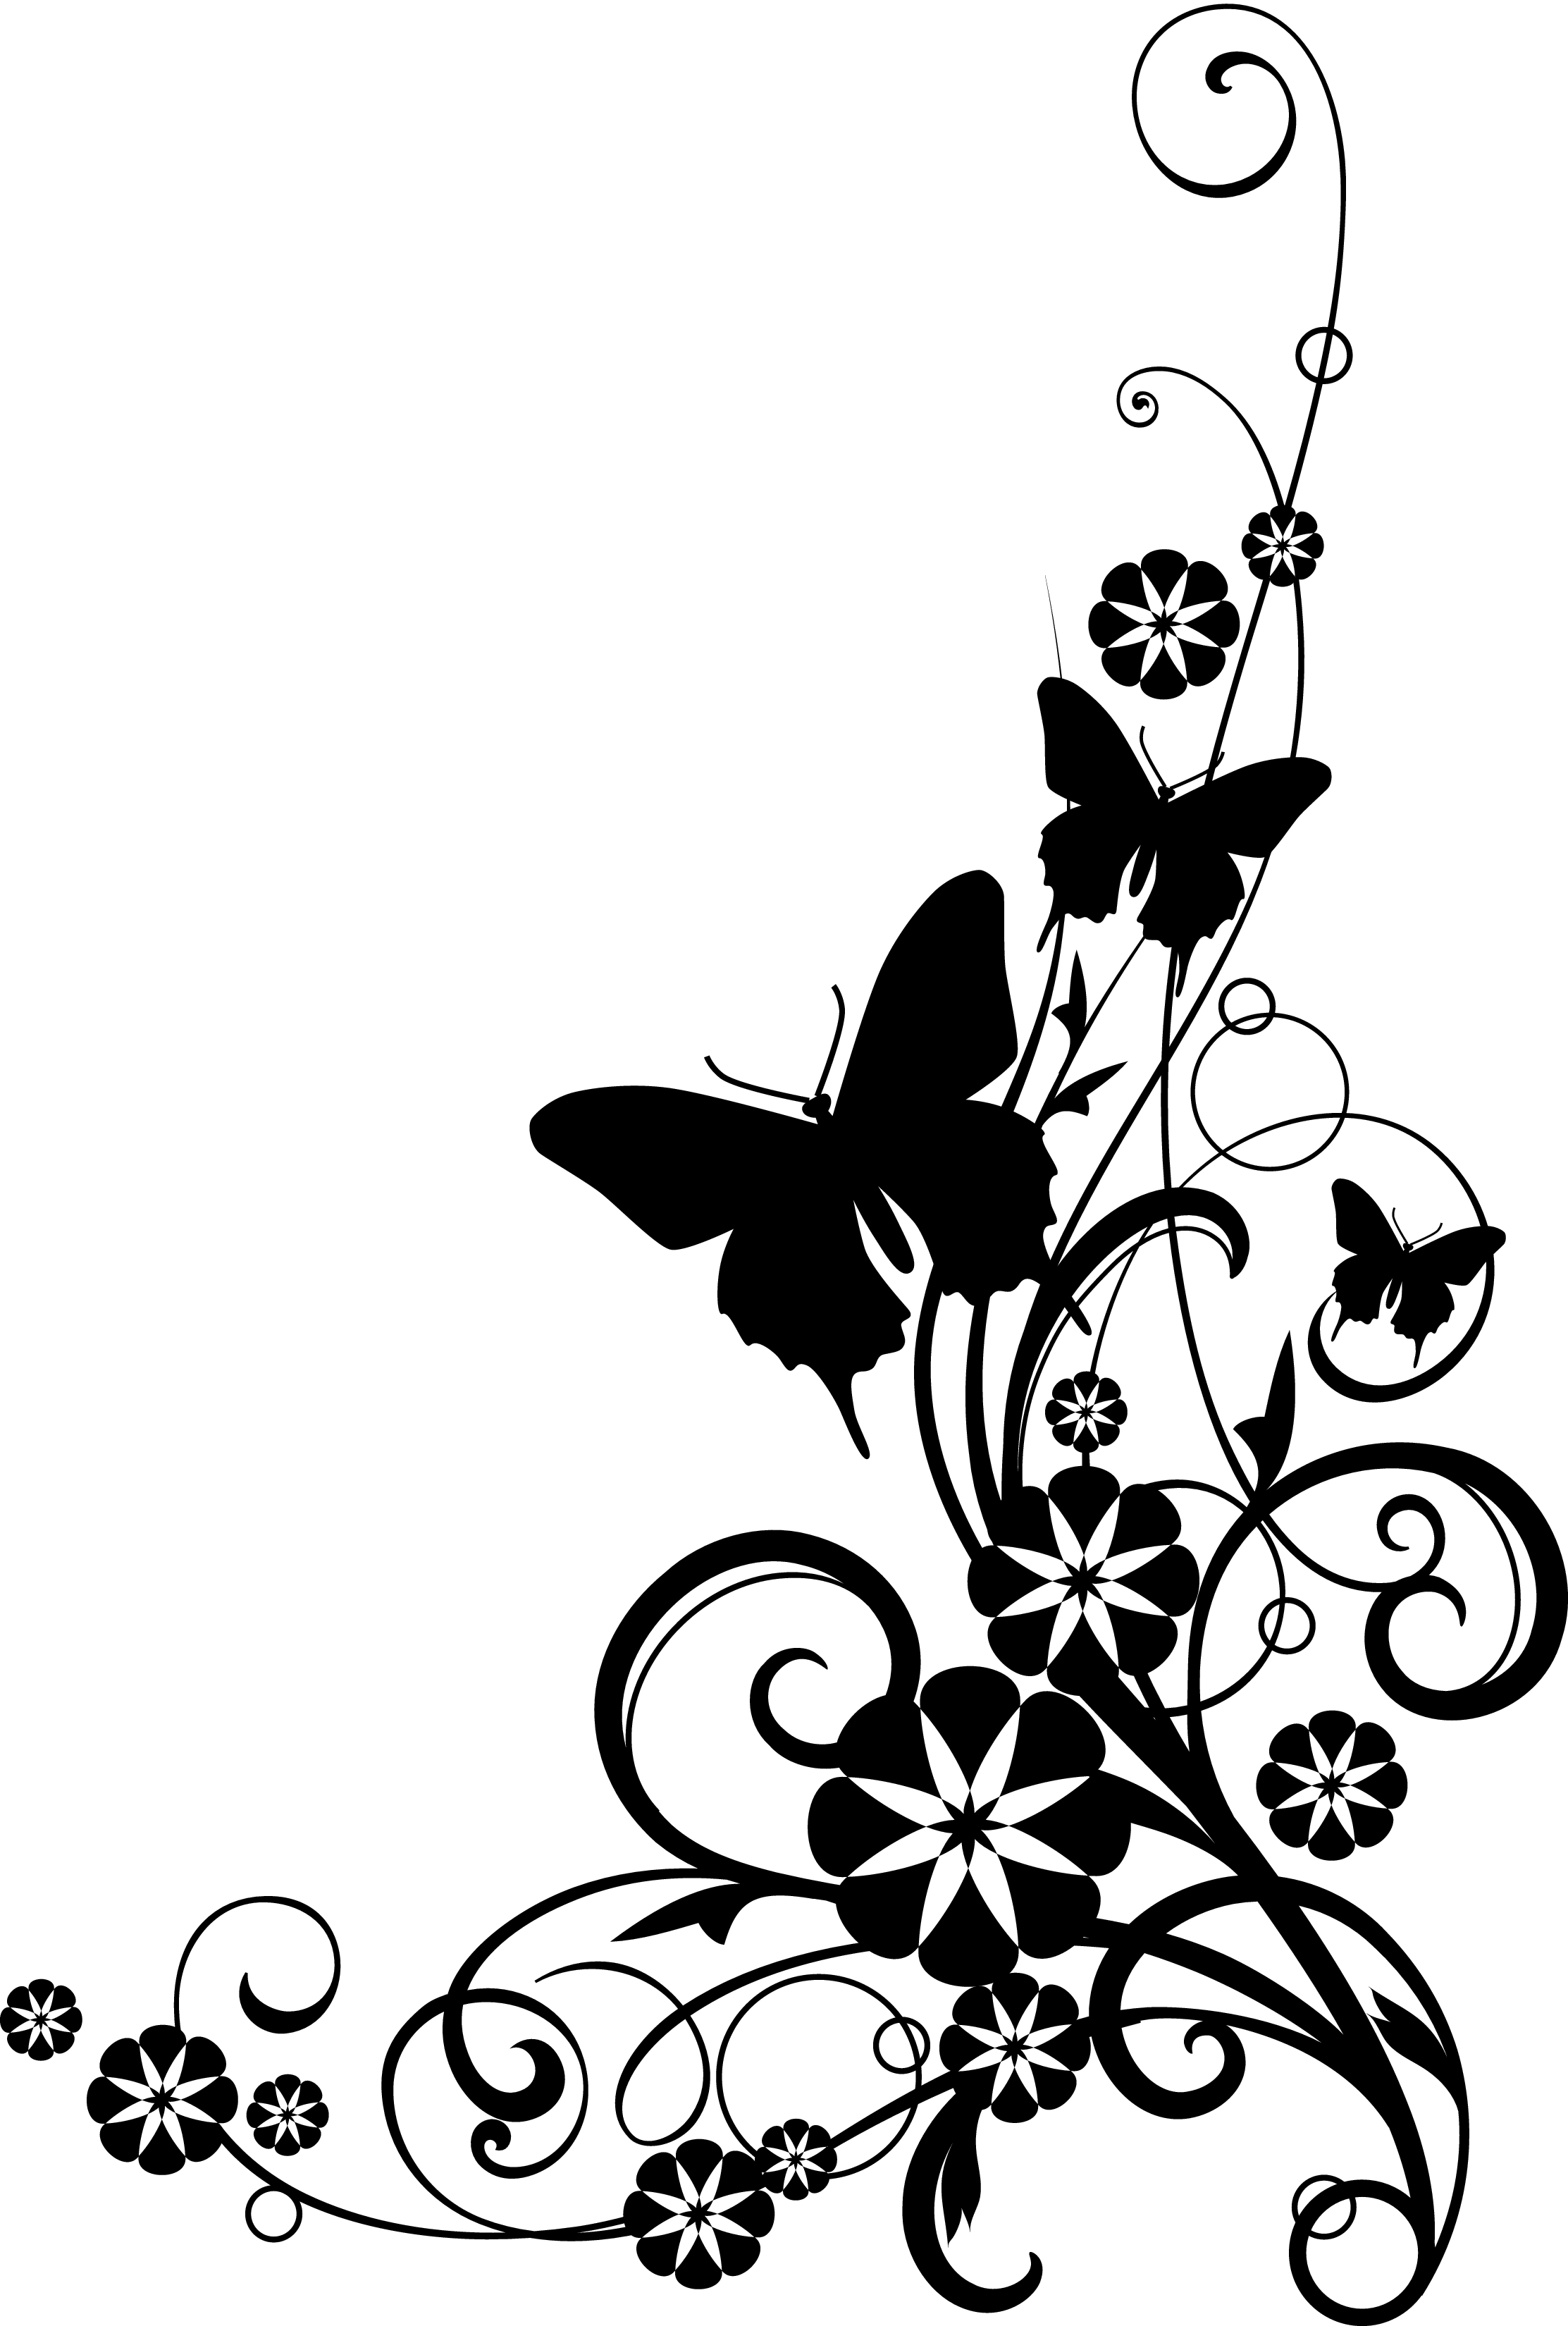 Flower Clip Art Black And White Hd Pictures 4 HD Wallpapers | 